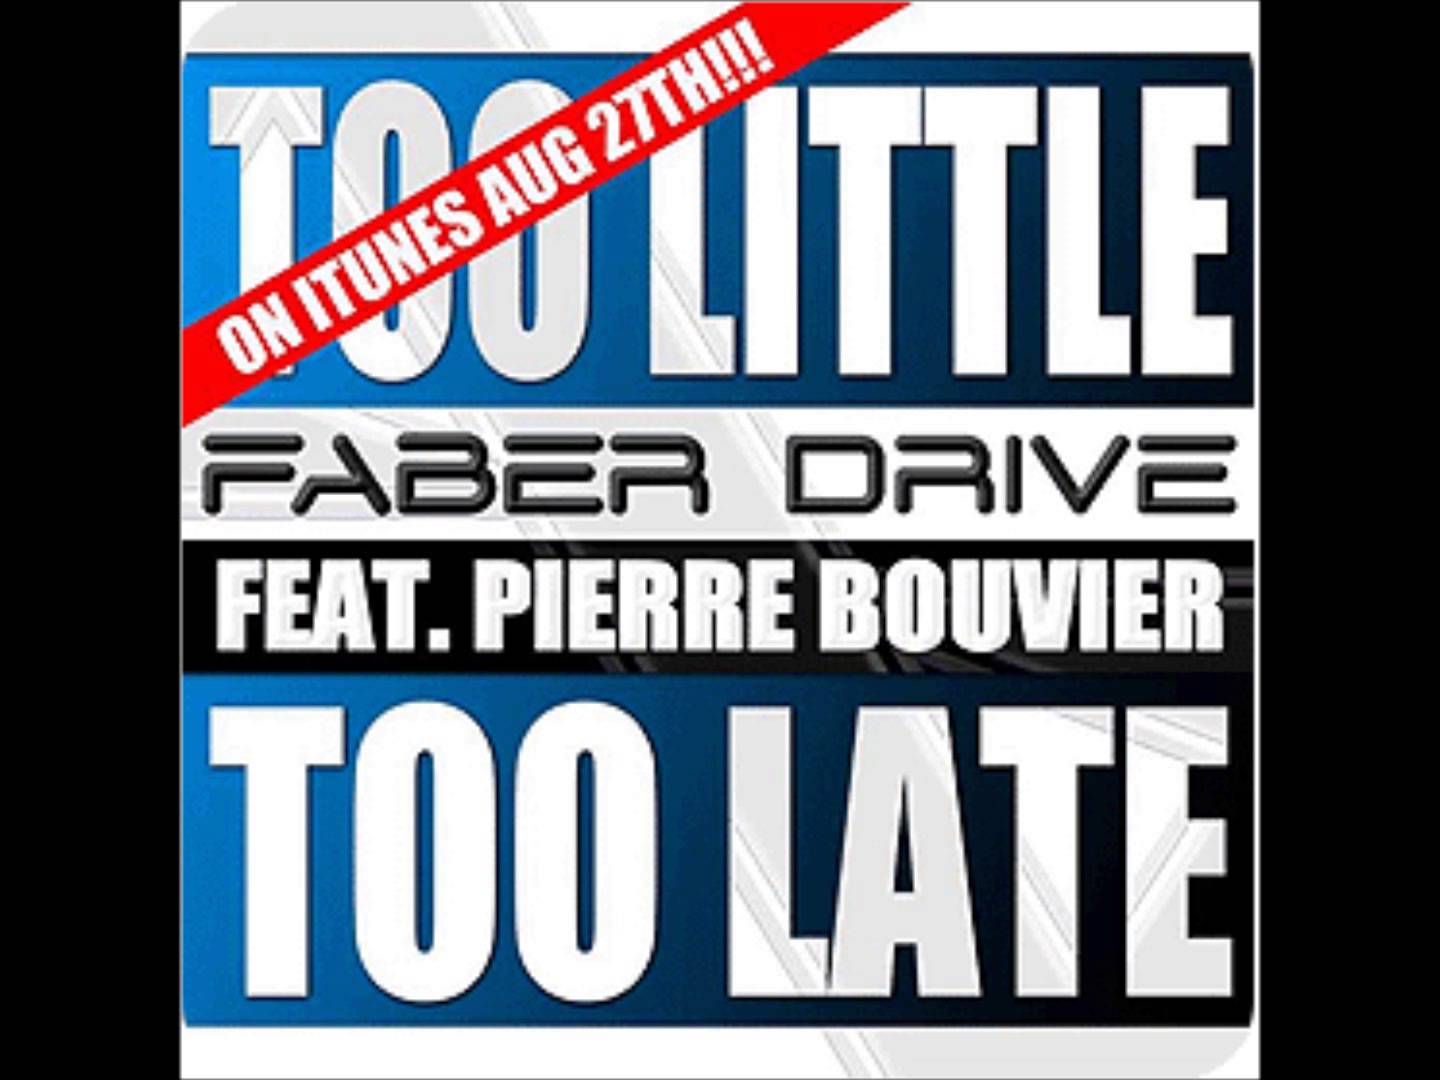 Faber Drive - Too Little Too Late feat. Pierre Bouvier